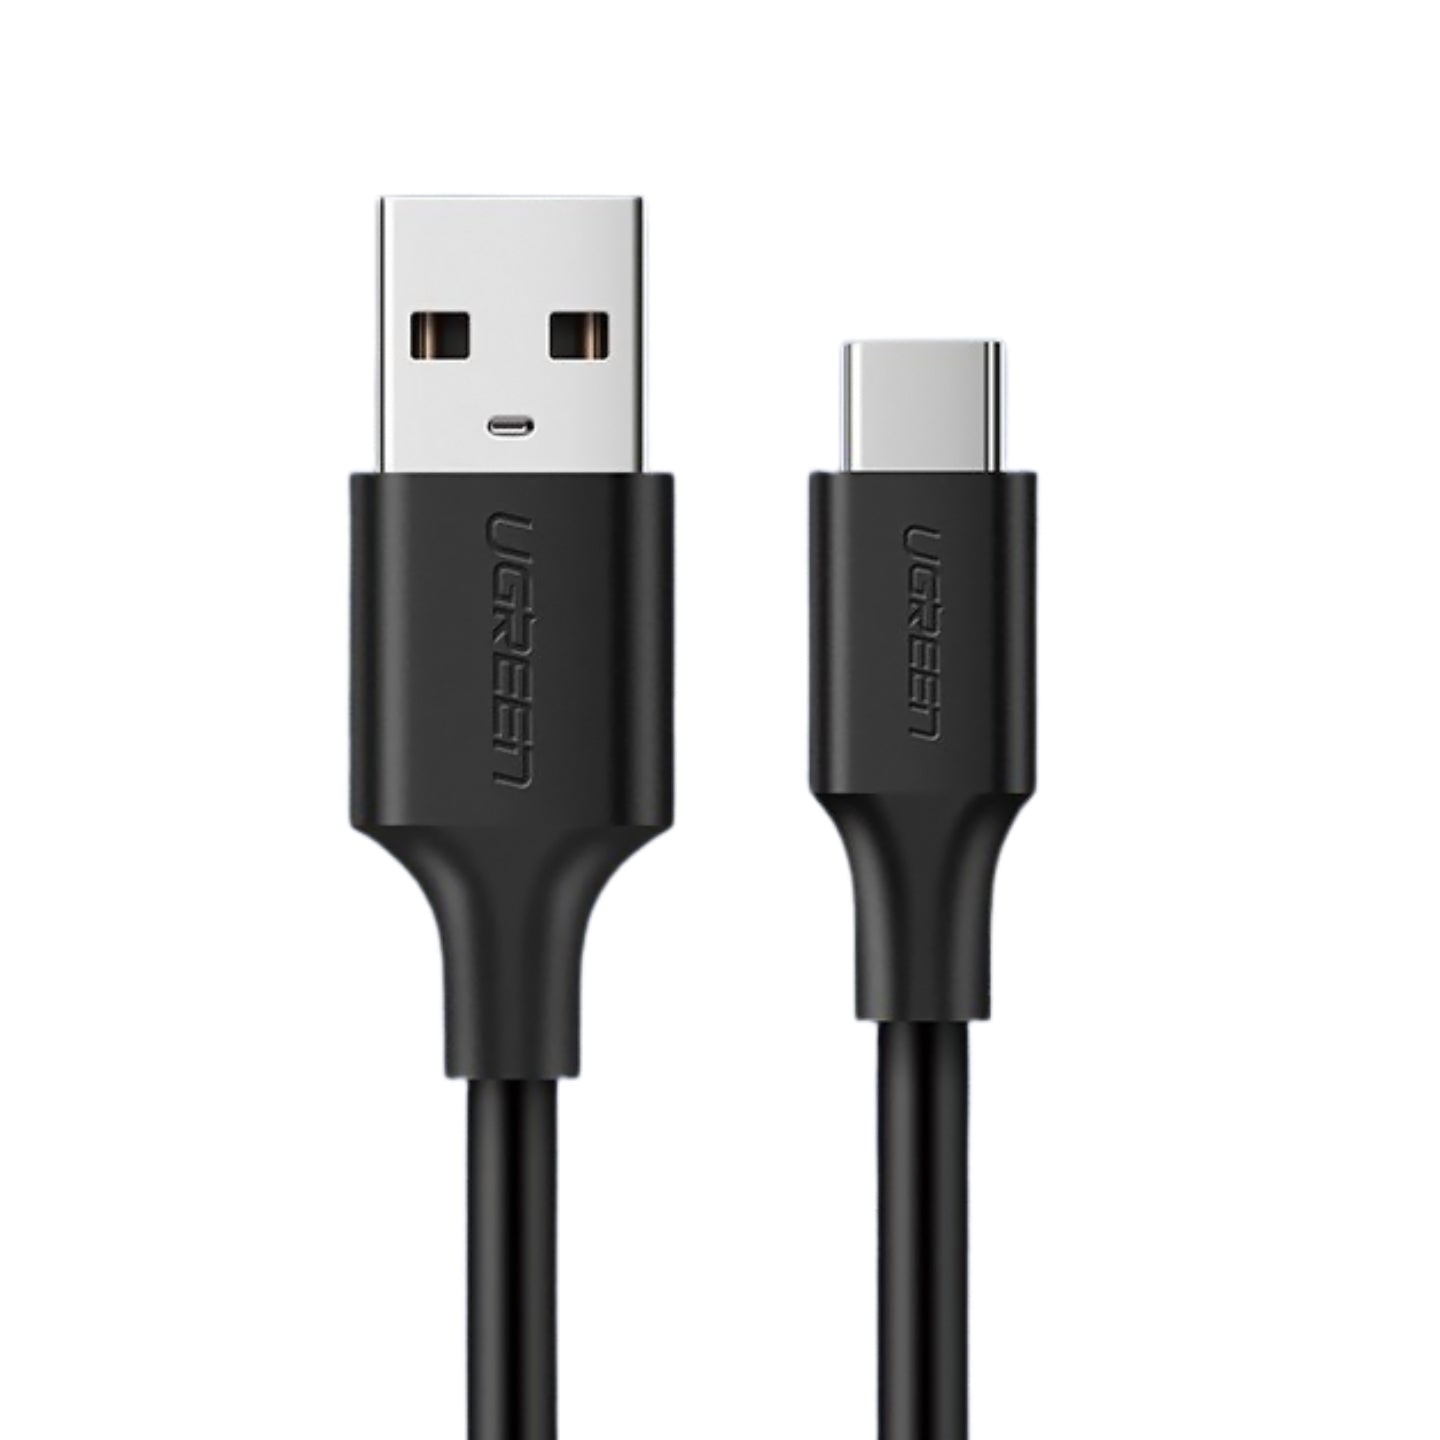 UGREEN USB-A 2.0 Male to USB-C Male 3A Fast Charging Data Cable with Nickel Plating, 480Mbps Transfer Speed, Overvoltage Protection (Black) (3M) | 60826